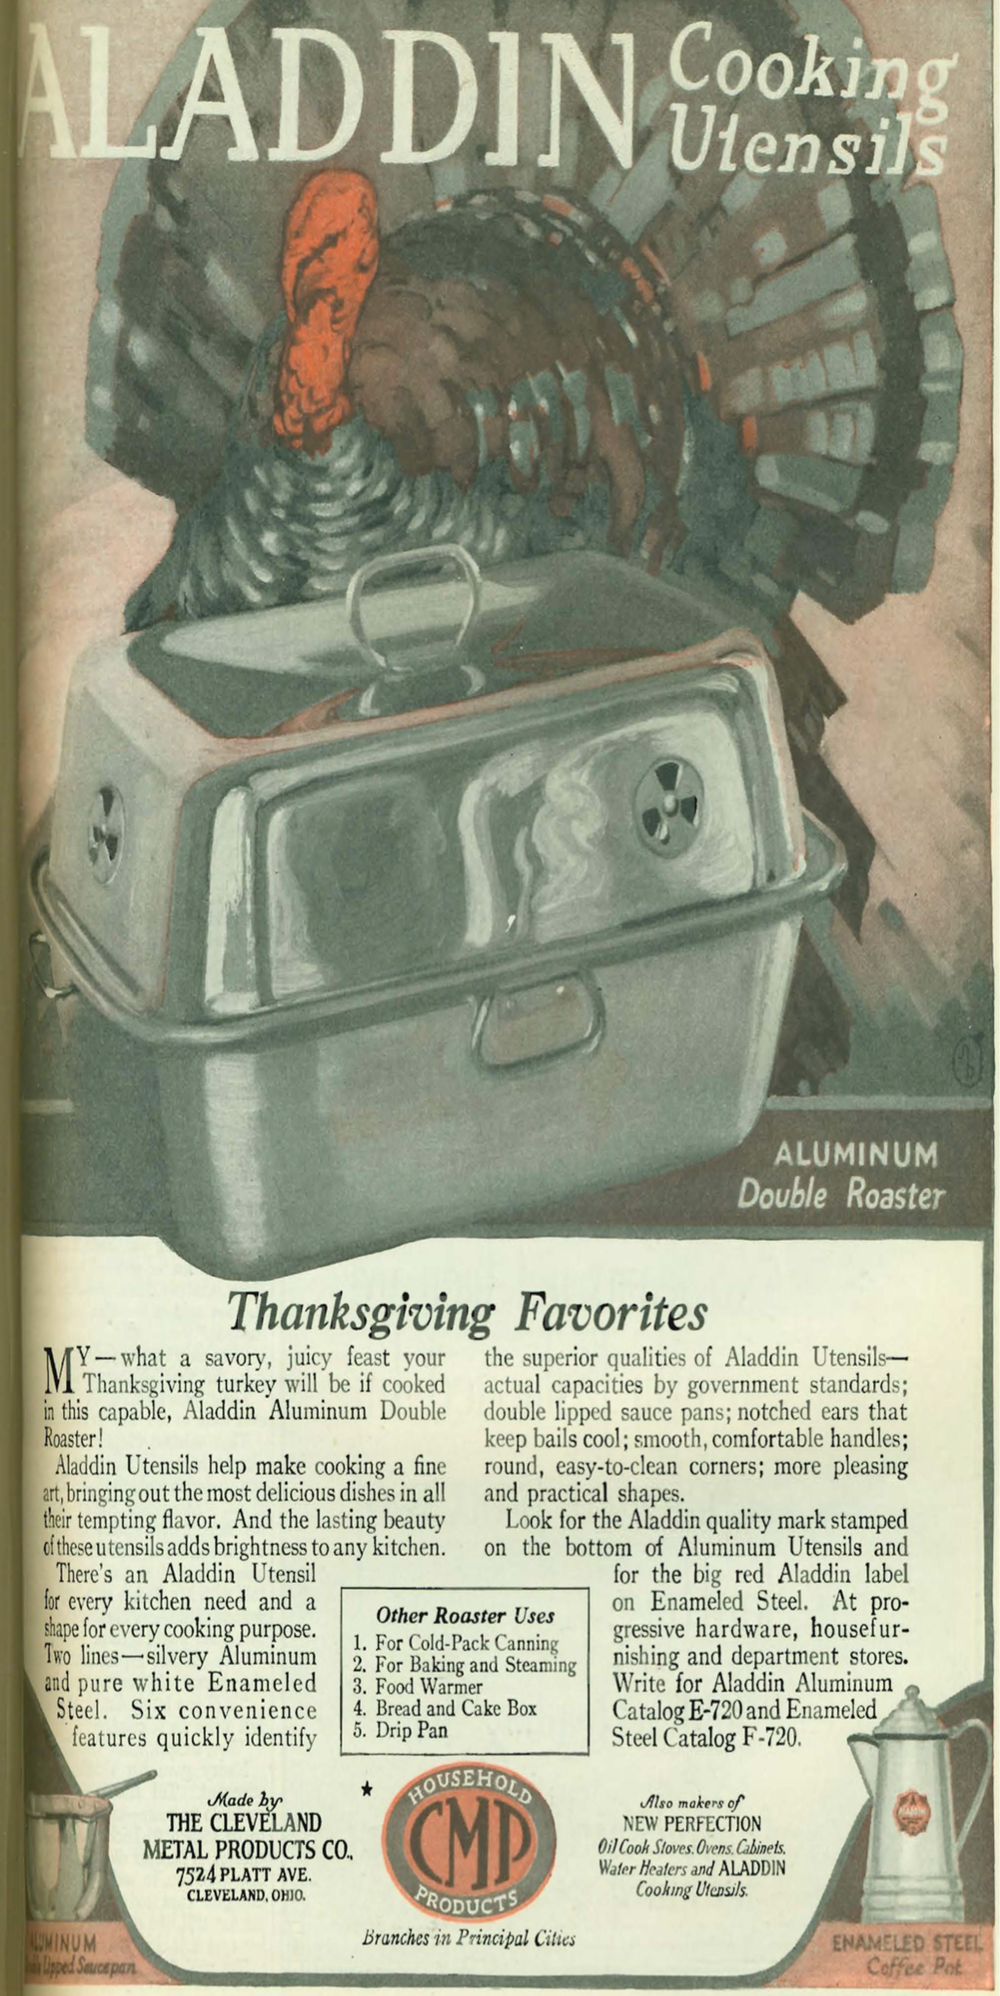 Aladdin Cooking Utensils advertises its double roaster in a 1920 issue of Good Housekeeping.